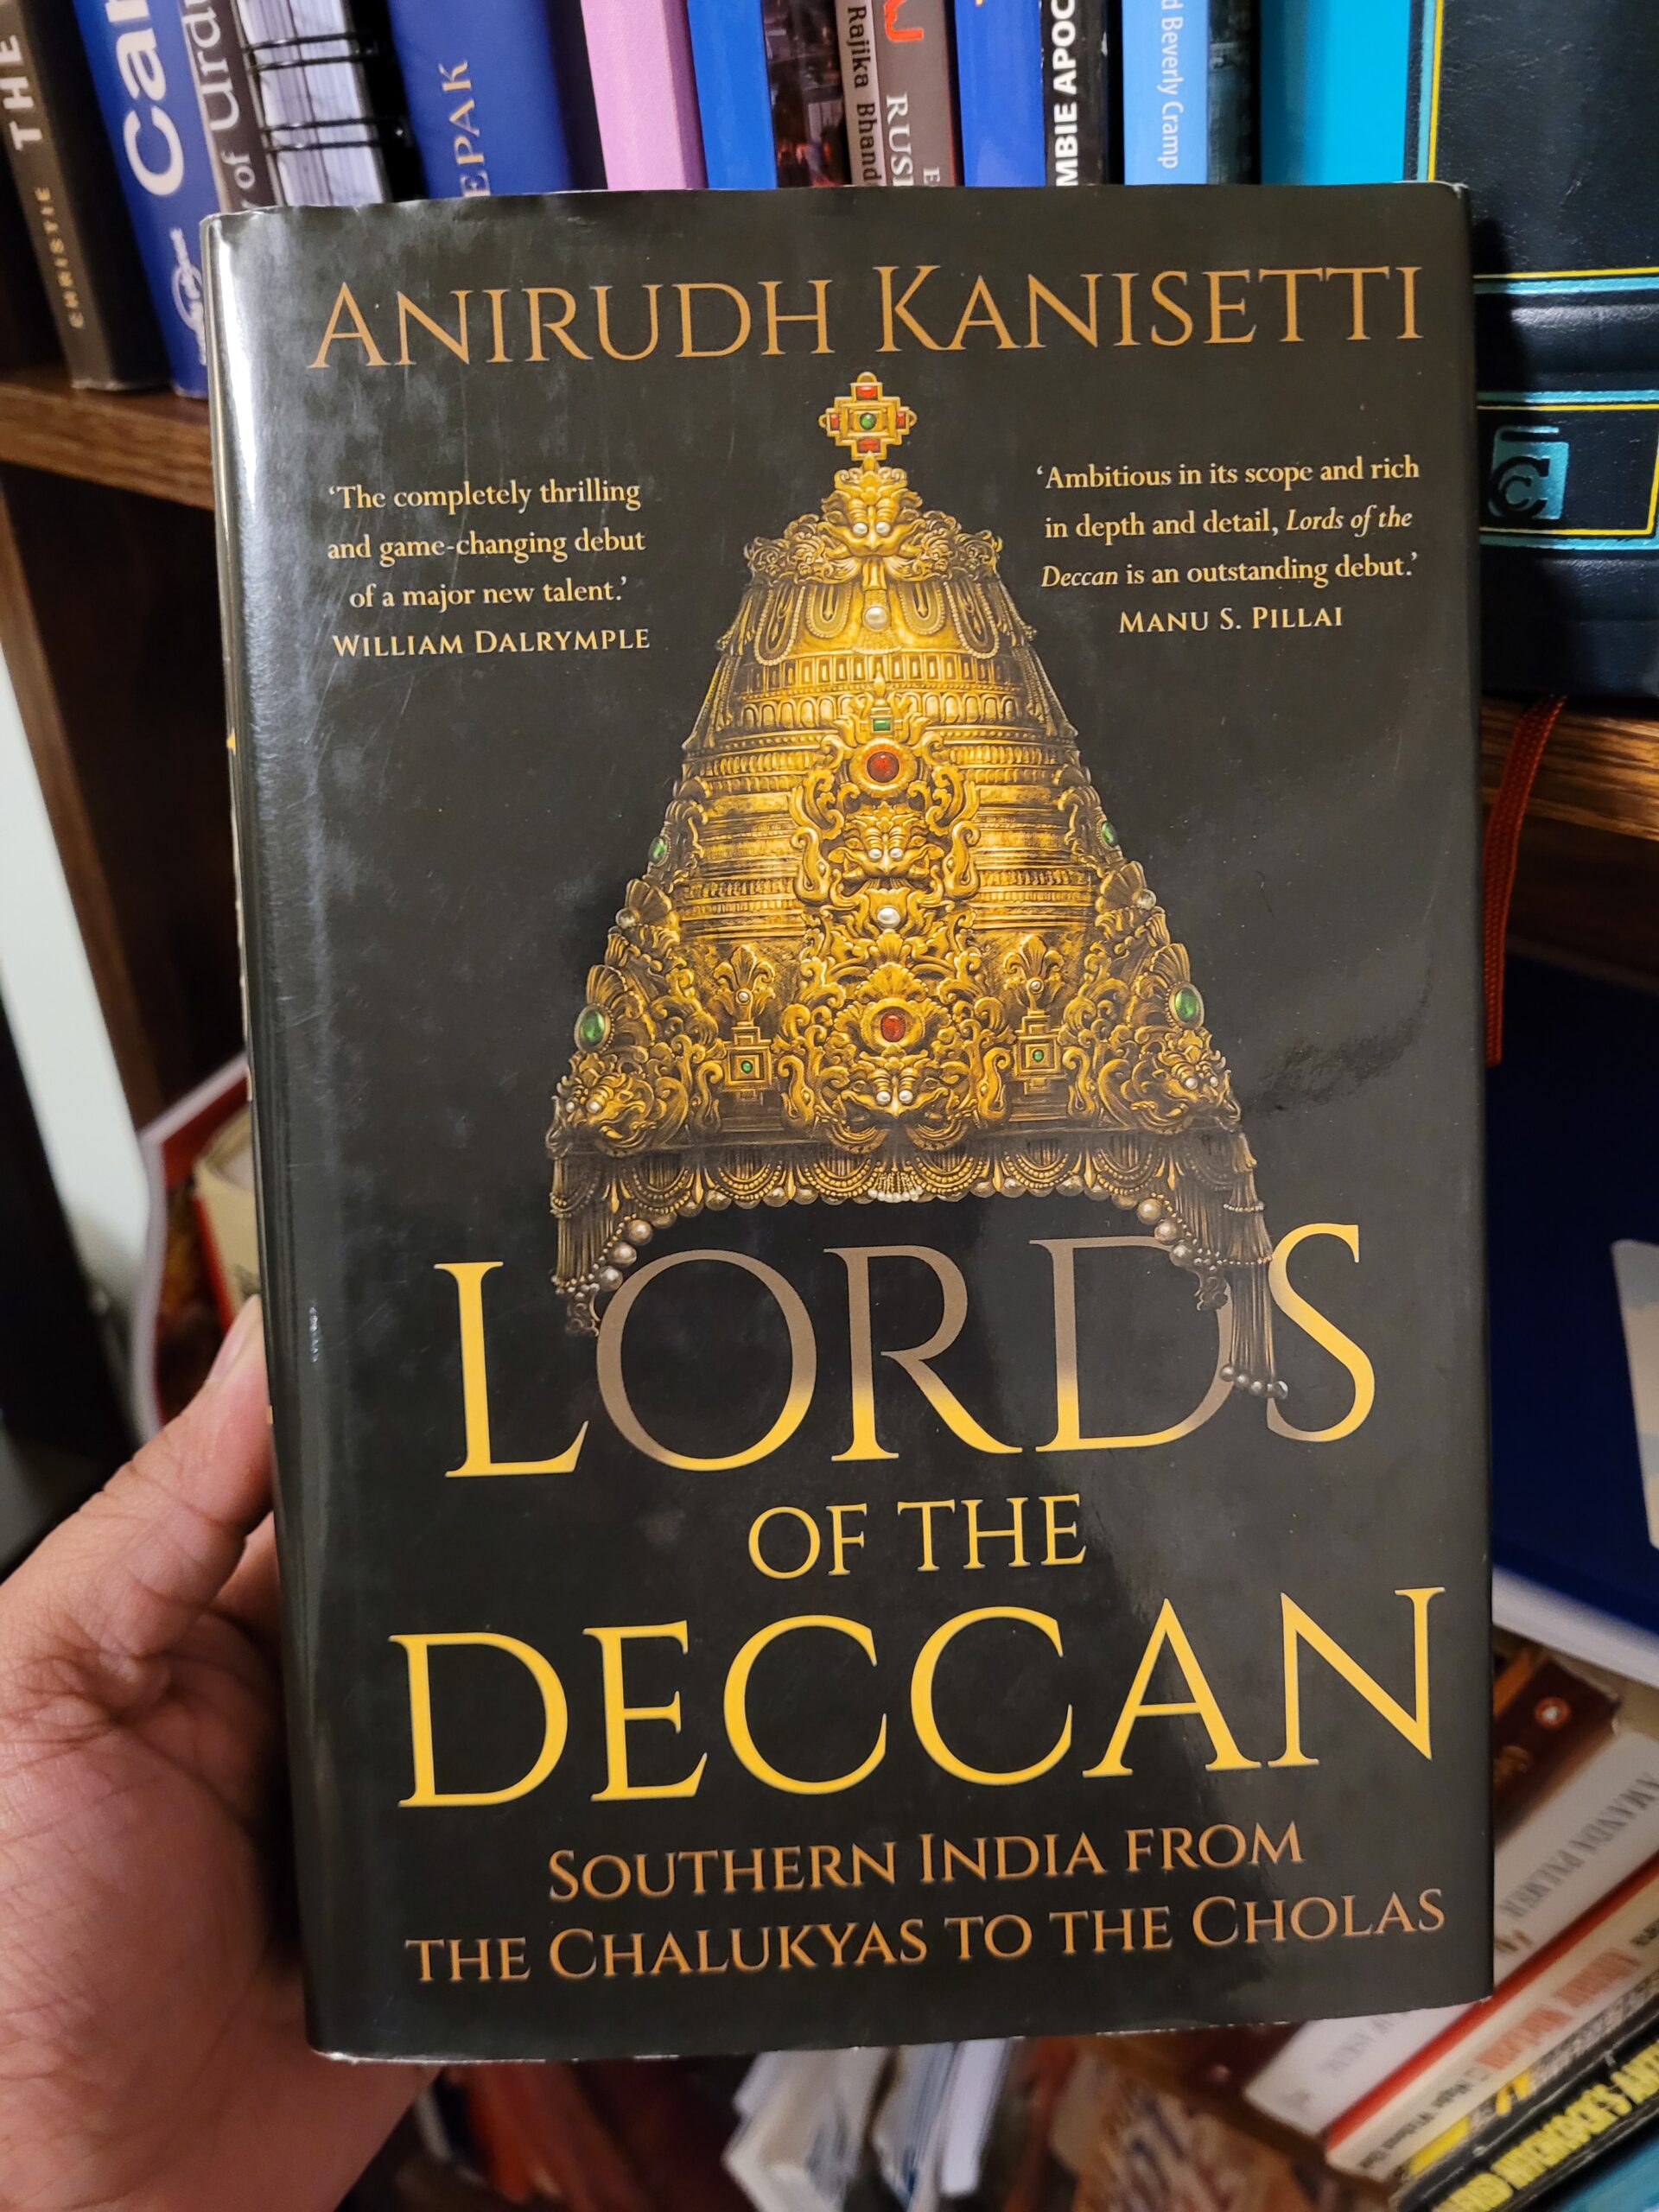 Lords of the Deccan by Anirudh Kanisetti || A 10 point book review